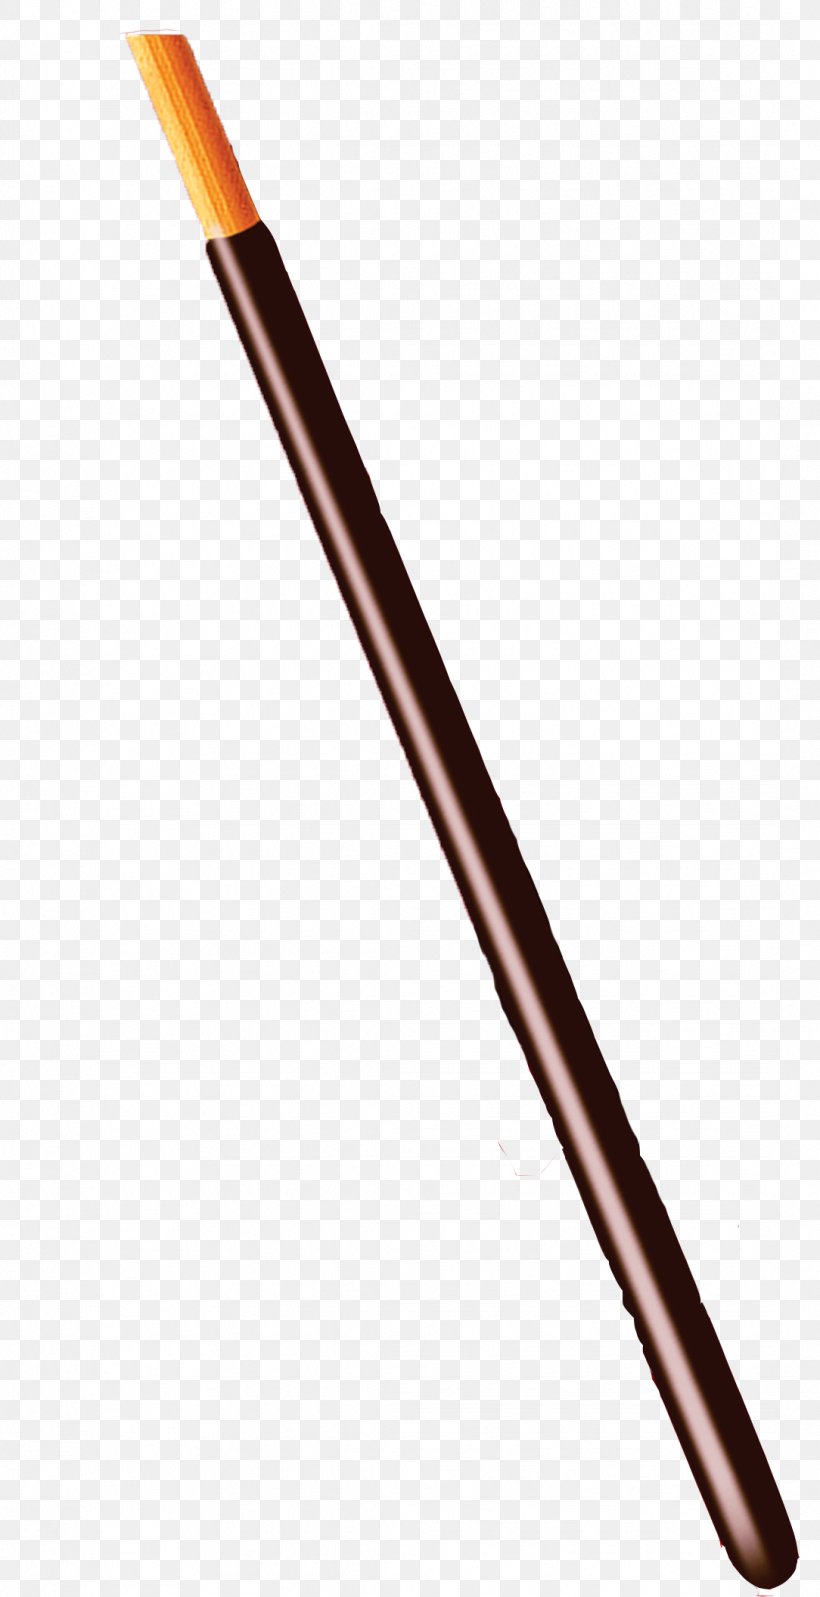 The Wizarding World Of Harry Potter Porpentina Goldstein Wand, PNG, 1084x2112px, Harry Potter, Brush, Magician, Porpentina Goldstein, Wand Download Free